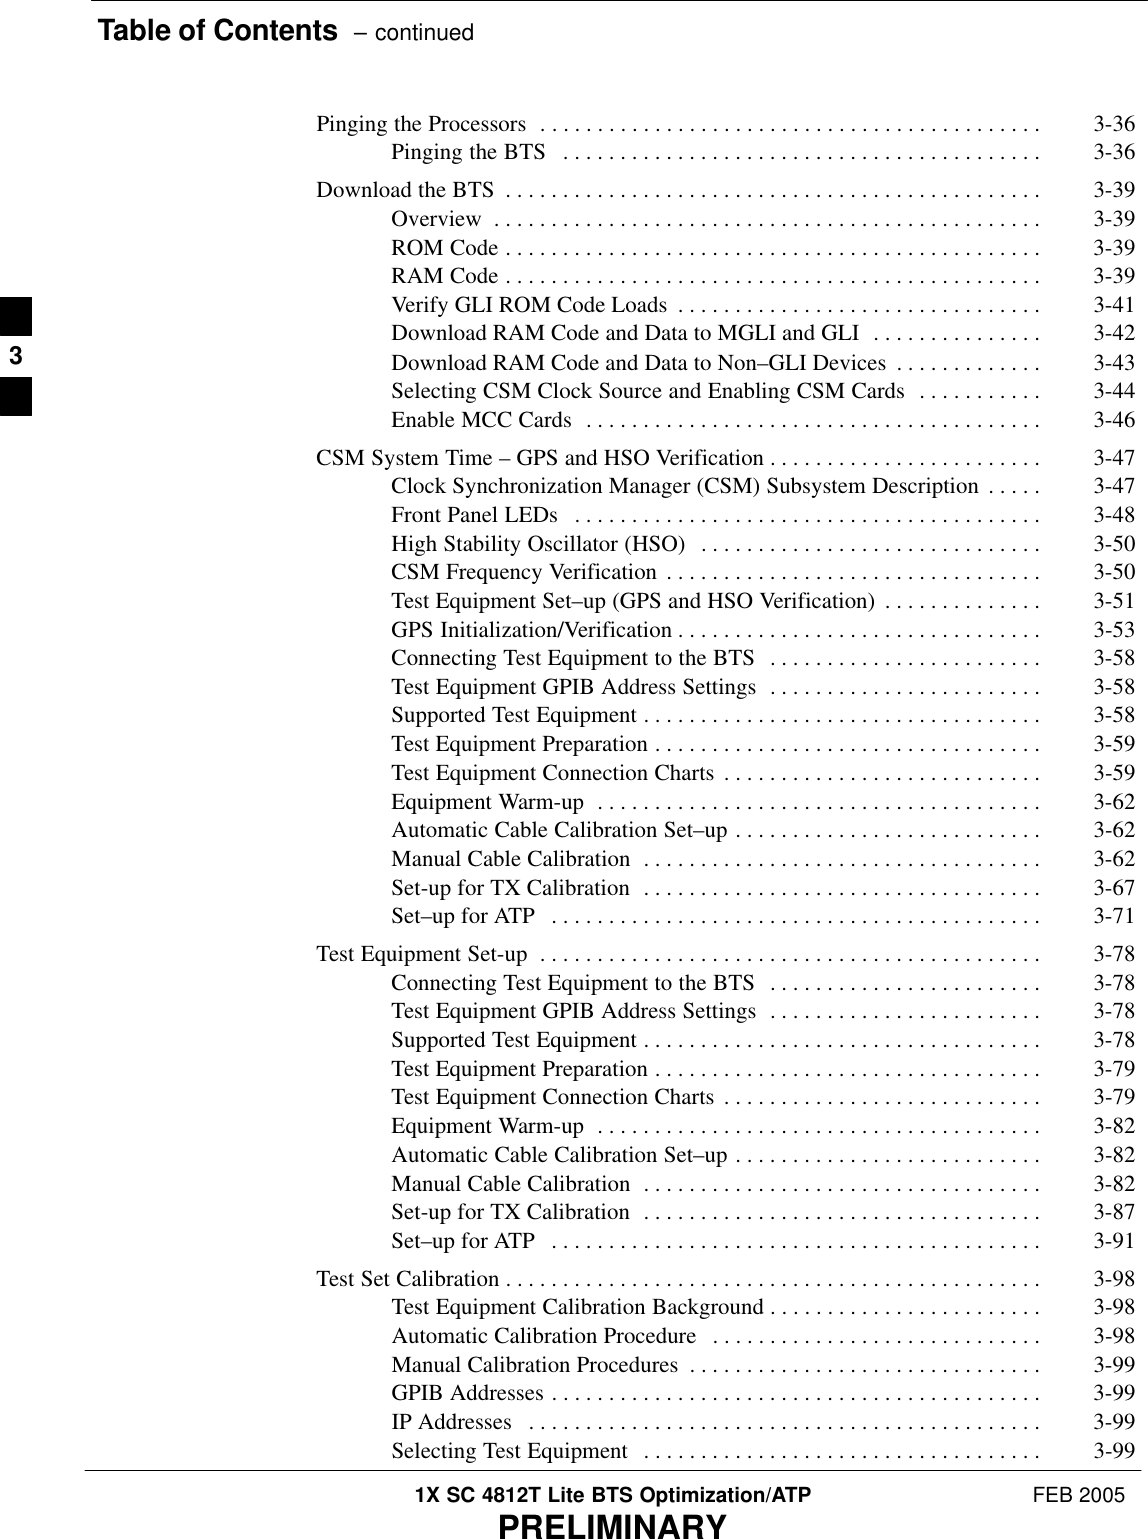 Table of Contents  – continued1X SC 4812T Lite BTS Optimization/ATP FEB 2005PRELIMINARYPinging the Processors 3-36 . . . . . . . . . . . . . . . . . . . . . . . . . . . . . . . . . . . . . . . . . . . . Pinging the BTS 3-36 . . . . . . . . . . . . . . . . . . . . . . . . . . . . . . . . . . . . . . . . . . Download the BTS 3-39 . . . . . . . . . . . . . . . . . . . . . . . . . . . . . . . . . . . . . . . . . . . . . . . Overview 3-39 . . . . . . . . . . . . . . . . . . . . . . . . . . . . . . . . . . . . . . . . . . . . . . . . ROM Code 3-39 . . . . . . . . . . . . . . . . . . . . . . . . . . . . . . . . . . . . . . . . . . . . . . . RAM Code 3-39 . . . . . . . . . . . . . . . . . . . . . . . . . . . . . . . . . . . . . . . . . . . . . . . Verify GLI ROM Code Loads 3-41 . . . . . . . . . . . . . . . . . . . . . . . . . . . . . . . . Download RAM Code and Data to MGLI and GLI 3-42 . . . . . . . . . . . . . . . Download RAM Code and Data to Non–GLI Devices 3-43 . . . . . . . . . . . . . Selecting CSM Clock Source and Enabling CSM Cards 3-44 . . . . . . . . . . . Enable MCC Cards 3-46 . . . . . . . . . . . . . . . . . . . . . . . . . . . . . . . . . . . . . . . . CSM System Time – GPS and HSO Verification 3-47 . . . . . . . . . . . . . . . . . . . . . . . . Clock Synchronization Manager (CSM) Subsystem Description 3-47 . . . . . Front Panel LEDs 3-48 . . . . . . . . . . . . . . . . . . . . . . . . . . . . . . . . . . . . . . . . . High Stability Oscillator (HSO) 3-50 . . . . . . . . . . . . . . . . . . . . . . . . . . . . . . CSM Frequency Verification 3-50 . . . . . . . . . . . . . . . . . . . . . . . . . . . . . . . . . Test Equipment Set–up (GPS and HSO Verification) 3-51 . . . . . . . . . . . . . . GPS Initialization/Verification 3-53 . . . . . . . . . . . . . . . . . . . . . . . . . . . . . . . . Connecting Test Equipment to the BTS 3-58 . . . . . . . . . . . . . . . . . . . . . . . . Test Equipment GPIB Address Settings 3-58 . . . . . . . . . . . . . . . . . . . . . . . . Supported Test Equipment 3-58 . . . . . . . . . . . . . . . . . . . . . . . . . . . . . . . . . . . Test Equipment Preparation 3-59 . . . . . . . . . . . . . . . . . . . . . . . . . . . . . . . . . . Test Equipment Connection Charts 3-59 . . . . . . . . . . . . . . . . . . . . . . . . . . . . Equipment Warm-up 3-62 . . . . . . . . . . . . . . . . . . . . . . . . . . . . . . . . . . . . . . . Automatic Cable Calibration Set–up 3-62 . . . . . . . . . . . . . . . . . . . . . . . . . . . Manual Cable Calibration 3-62 . . . . . . . . . . . . . . . . . . . . . . . . . . . . . . . . . . . Set-up for TX Calibration 3-67 . . . . . . . . . . . . . . . . . . . . . . . . . . . . . . . . . . . Set–up for ATP 3-71 . . . . . . . . . . . . . . . . . . . . . . . . . . . . . . . . . . . . . . . . . . . Test Equipment Set-up 3-78 . . . . . . . . . . . . . . . . . . . . . . . . . . . . . . . . . . . . . . . . . . . . Connecting Test Equipment to the BTS 3-78 . . . . . . . . . . . . . . . . . . . . . . . . Test Equipment GPIB Address Settings 3-78 . . . . . . . . . . . . . . . . . . . . . . . . Supported Test Equipment 3-78 . . . . . . . . . . . . . . . . . . . . . . . . . . . . . . . . . . . Test Equipment Preparation 3-79 . . . . . . . . . . . . . . . . . . . . . . . . . . . . . . . . . . Test Equipment Connection Charts 3-79 . . . . . . . . . . . . . . . . . . . . . . . . . . . . Equipment Warm-up 3-82 . . . . . . . . . . . . . . . . . . . . . . . . . . . . . . . . . . . . . . . Automatic Cable Calibration Set–up 3-82 . . . . . . . . . . . . . . . . . . . . . . . . . . . Manual Cable Calibration 3-82 . . . . . . . . . . . . . . . . . . . . . . . . . . . . . . . . . . . Set-up for TX Calibration 3-87 . . . . . . . . . . . . . . . . . . . . . . . . . . . . . . . . . . . Set–up for ATP 3-91 . . . . . . . . . . . . . . . . . . . . . . . . . . . . . . . . . . . . . . . . . . . Test Set Calibration 3-98 . . . . . . . . . . . . . . . . . . . . . . . . . . . . . . . . . . . . . . . . . . . . . . . Test Equipment Calibration Background 3-98 . . . . . . . . . . . . . . . . . . . . . . . . Automatic Calibration Procedure 3-98 . . . . . . . . . . . . . . . . . . . . . . . . . . . . . Manual Calibration Procedures 3-99 . . . . . . . . . . . . . . . . . . . . . . . . . . . . . . . GPIB Addresses 3-99 . . . . . . . . . . . . . . . . . . . . . . . . . . . . . . . . . . . . . . . . . . . IP Addresses 3-99 . . . . . . . . . . . . . . . . . . . . . . . . . . . . . . . . . . . . . . . . . . . . . Selecting Test Equipment 3-99 . . . . . . . . . . . . . . . . . . . . . . . . . . . . . . . . . . . 3